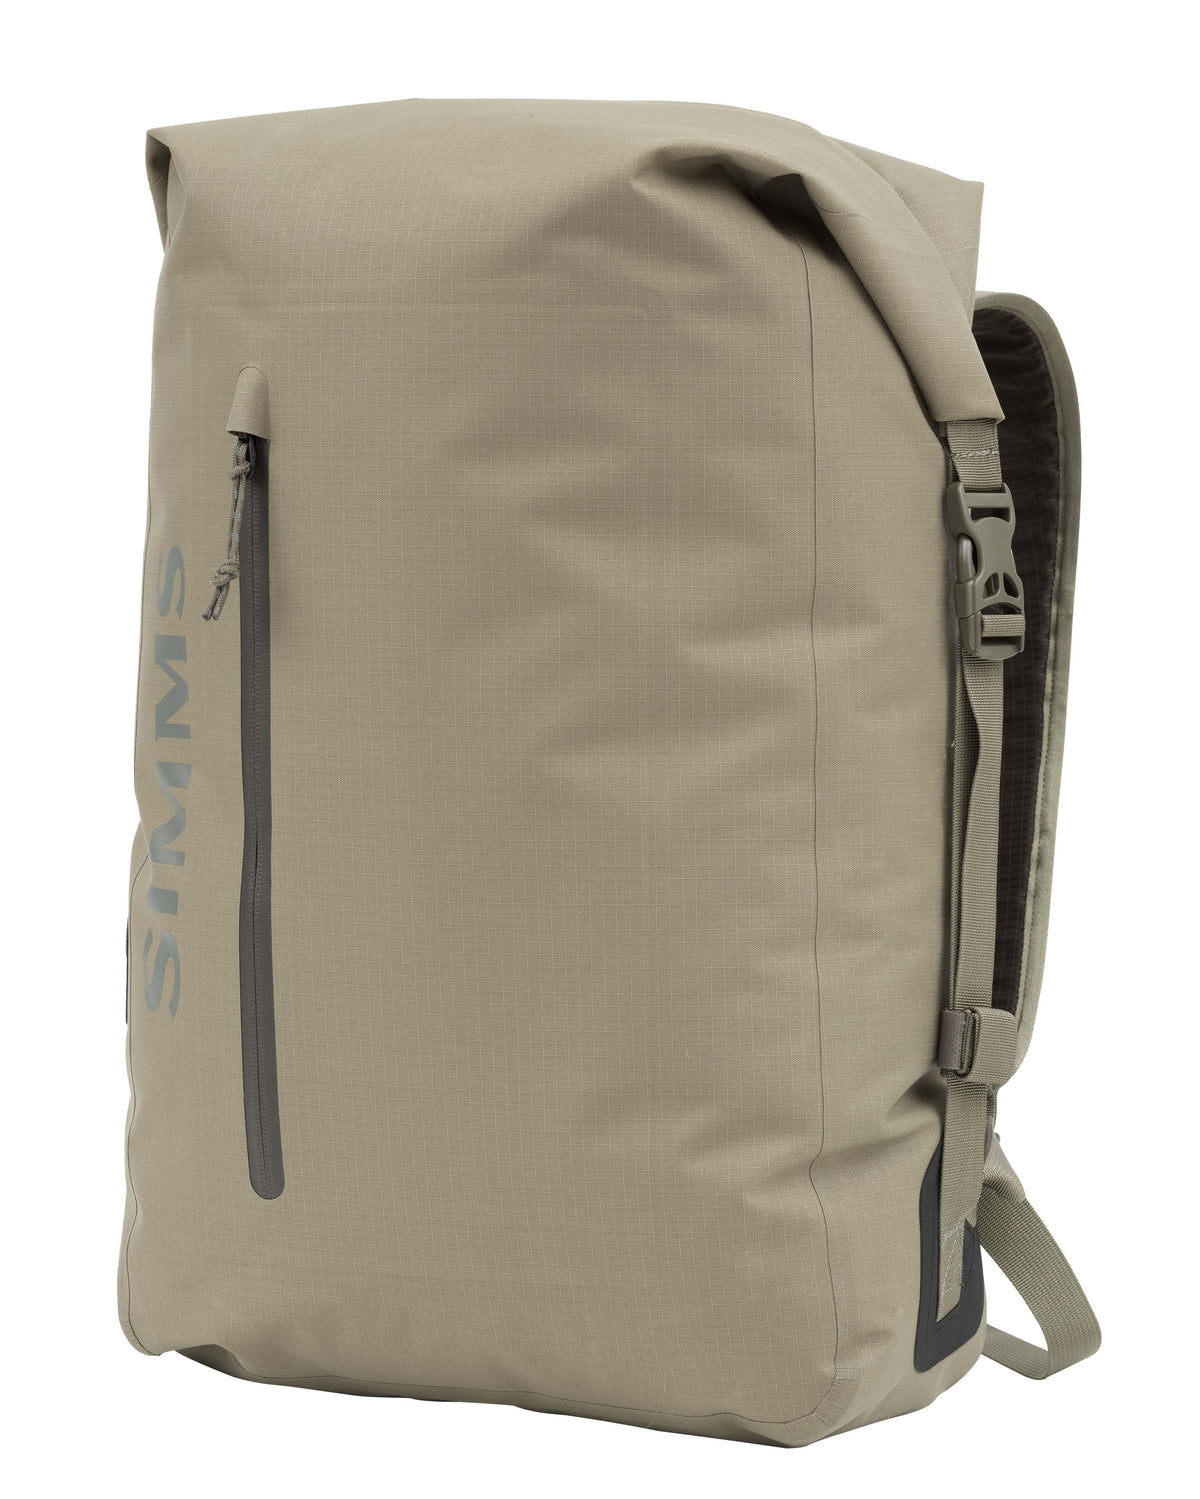 Simms Bags – Manic Tackle Project